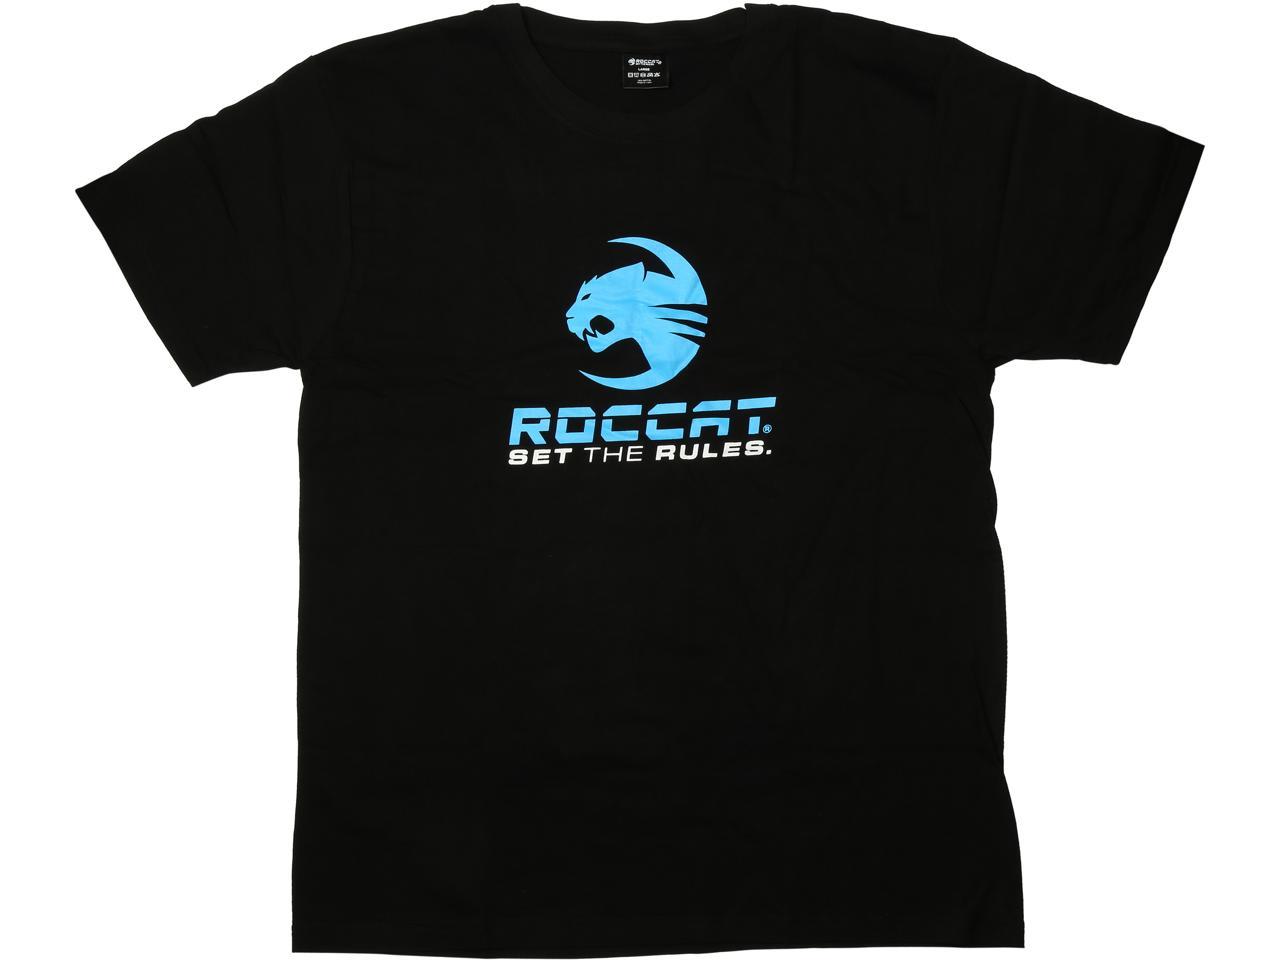 ROCCAT T-Shirts - SIZE L for $3.49+FS